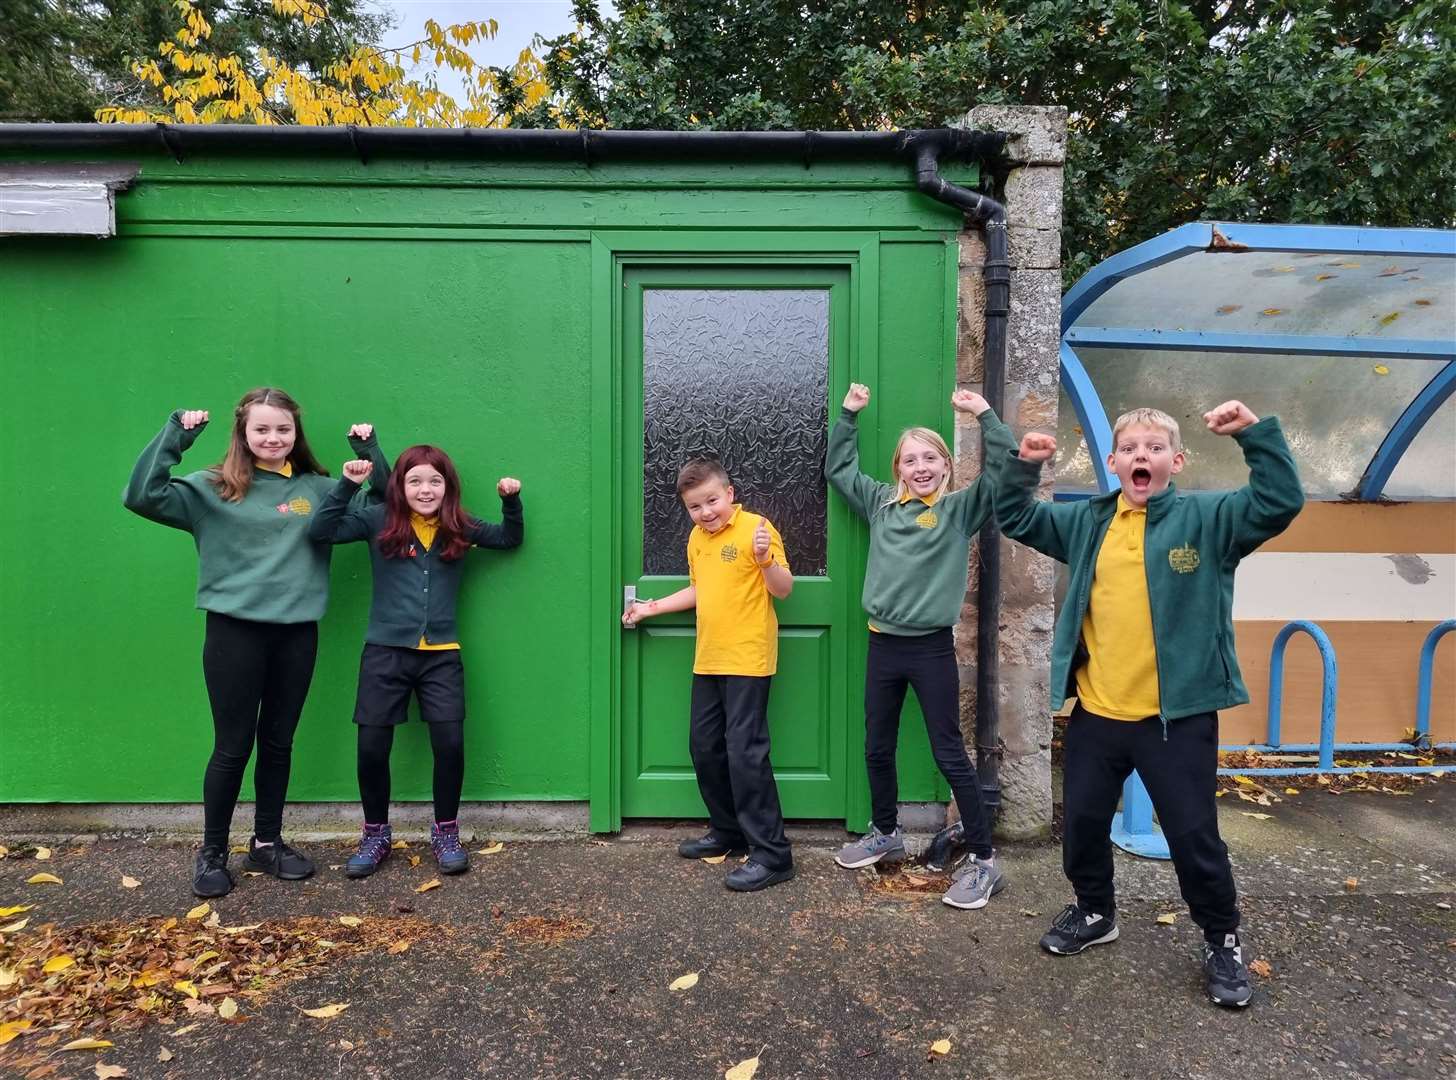 House and vice captains from Dyke Primary School proudly showing off their new uniform store.